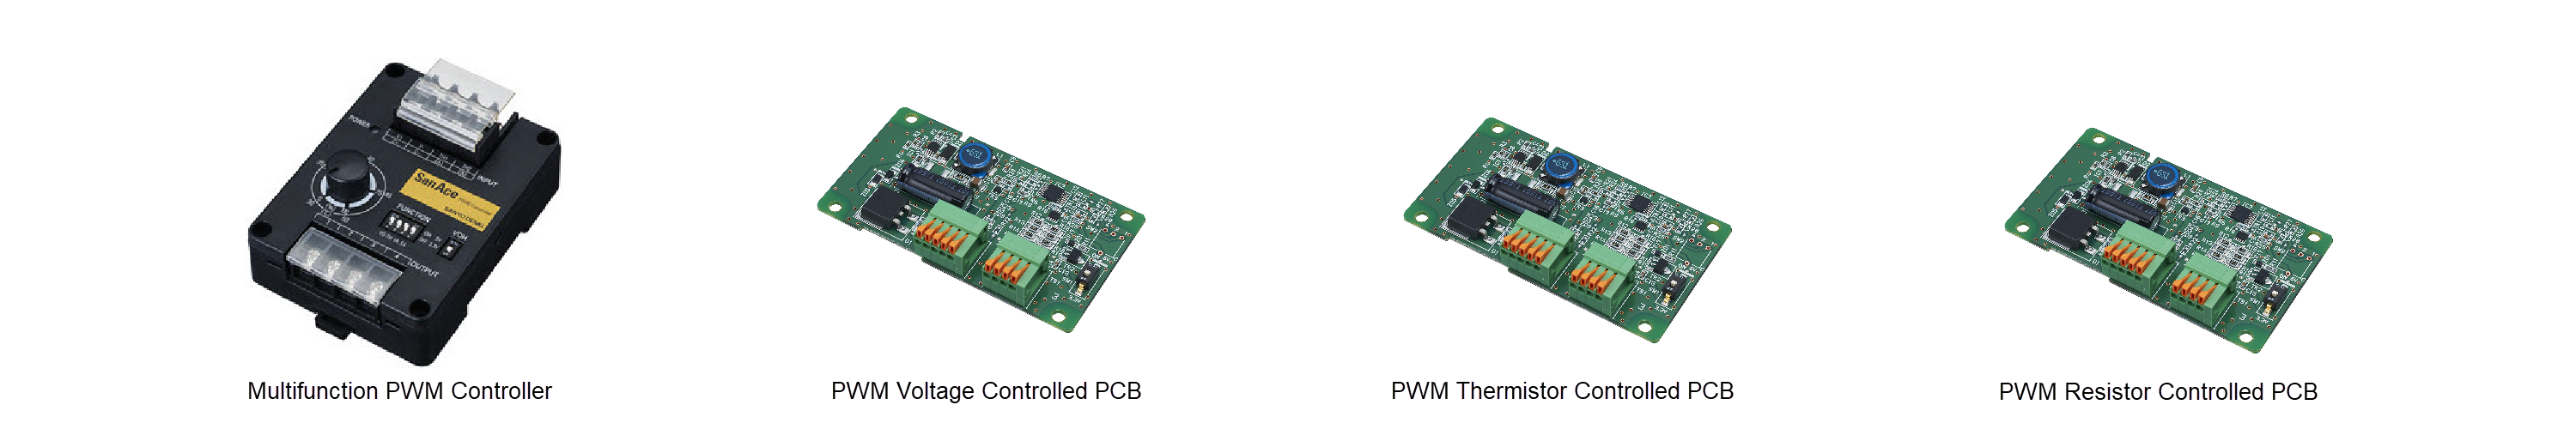 PWM Controllers Image